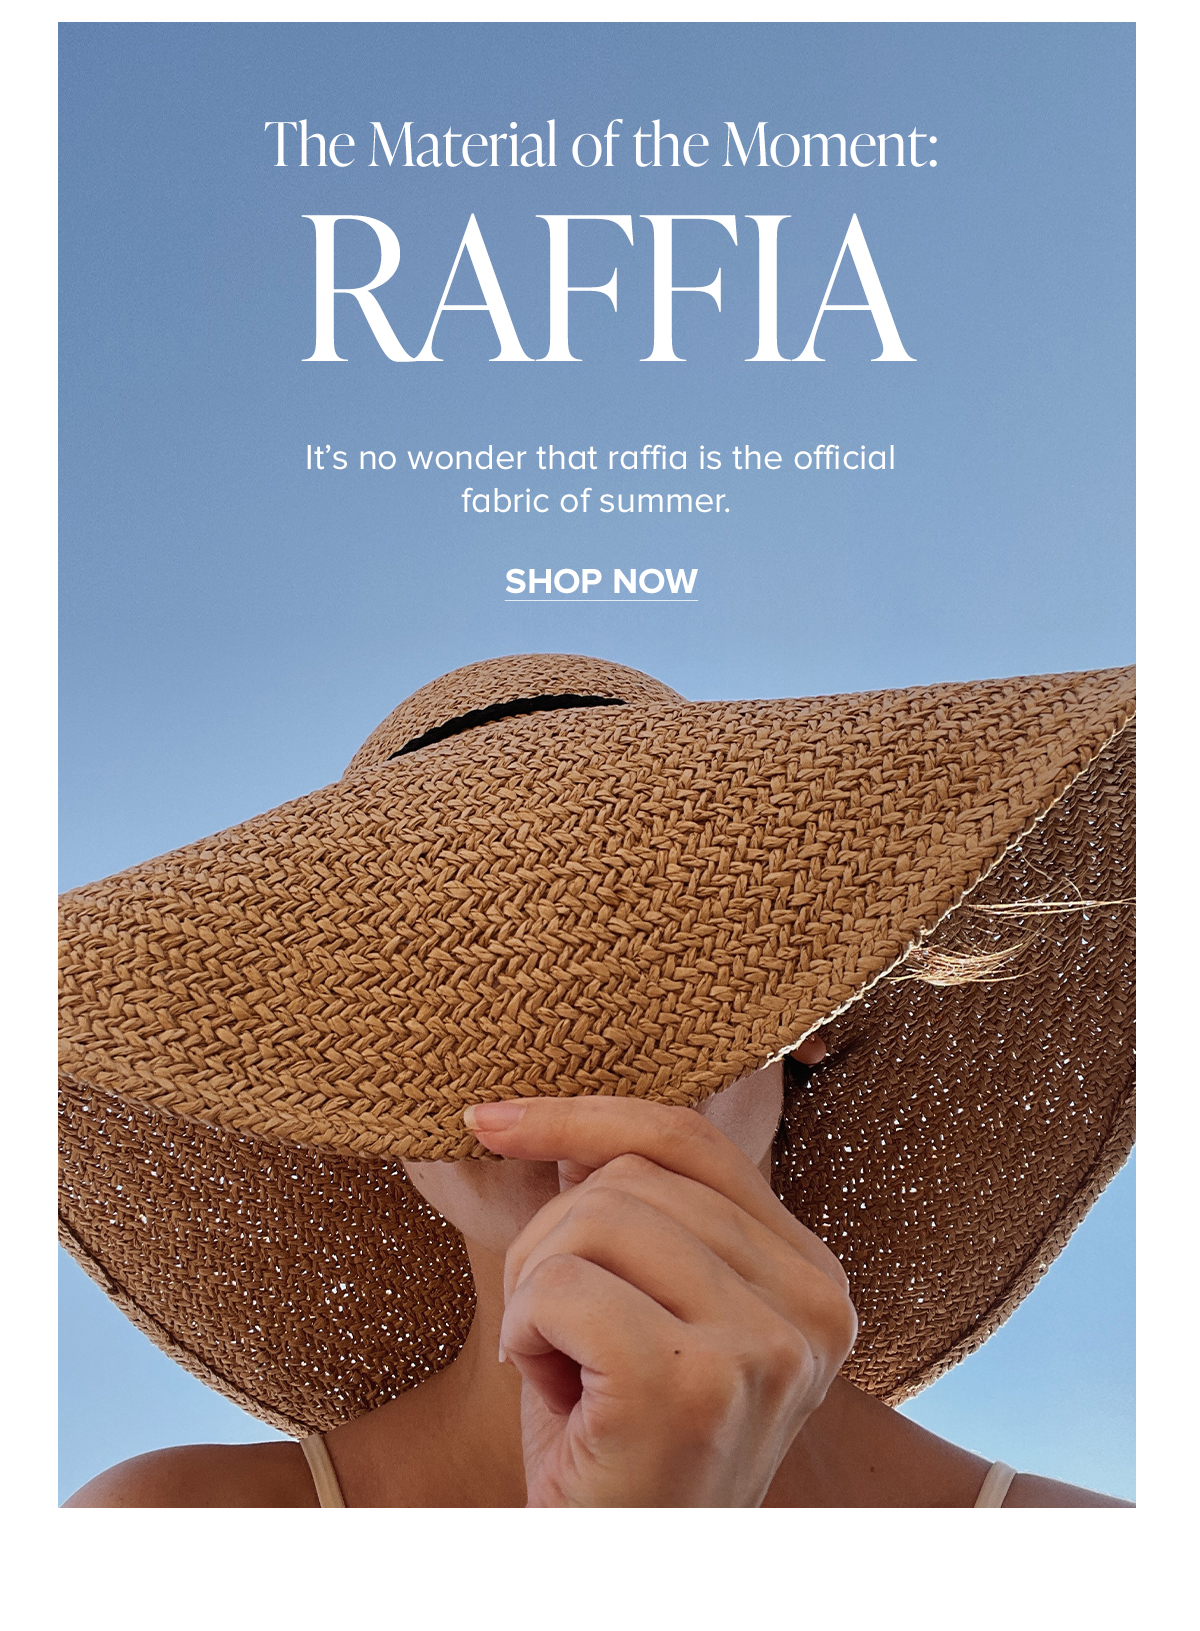 The Material of the Moment: RAFFIA - It's no wonder that raffia is the official fabric of summer.